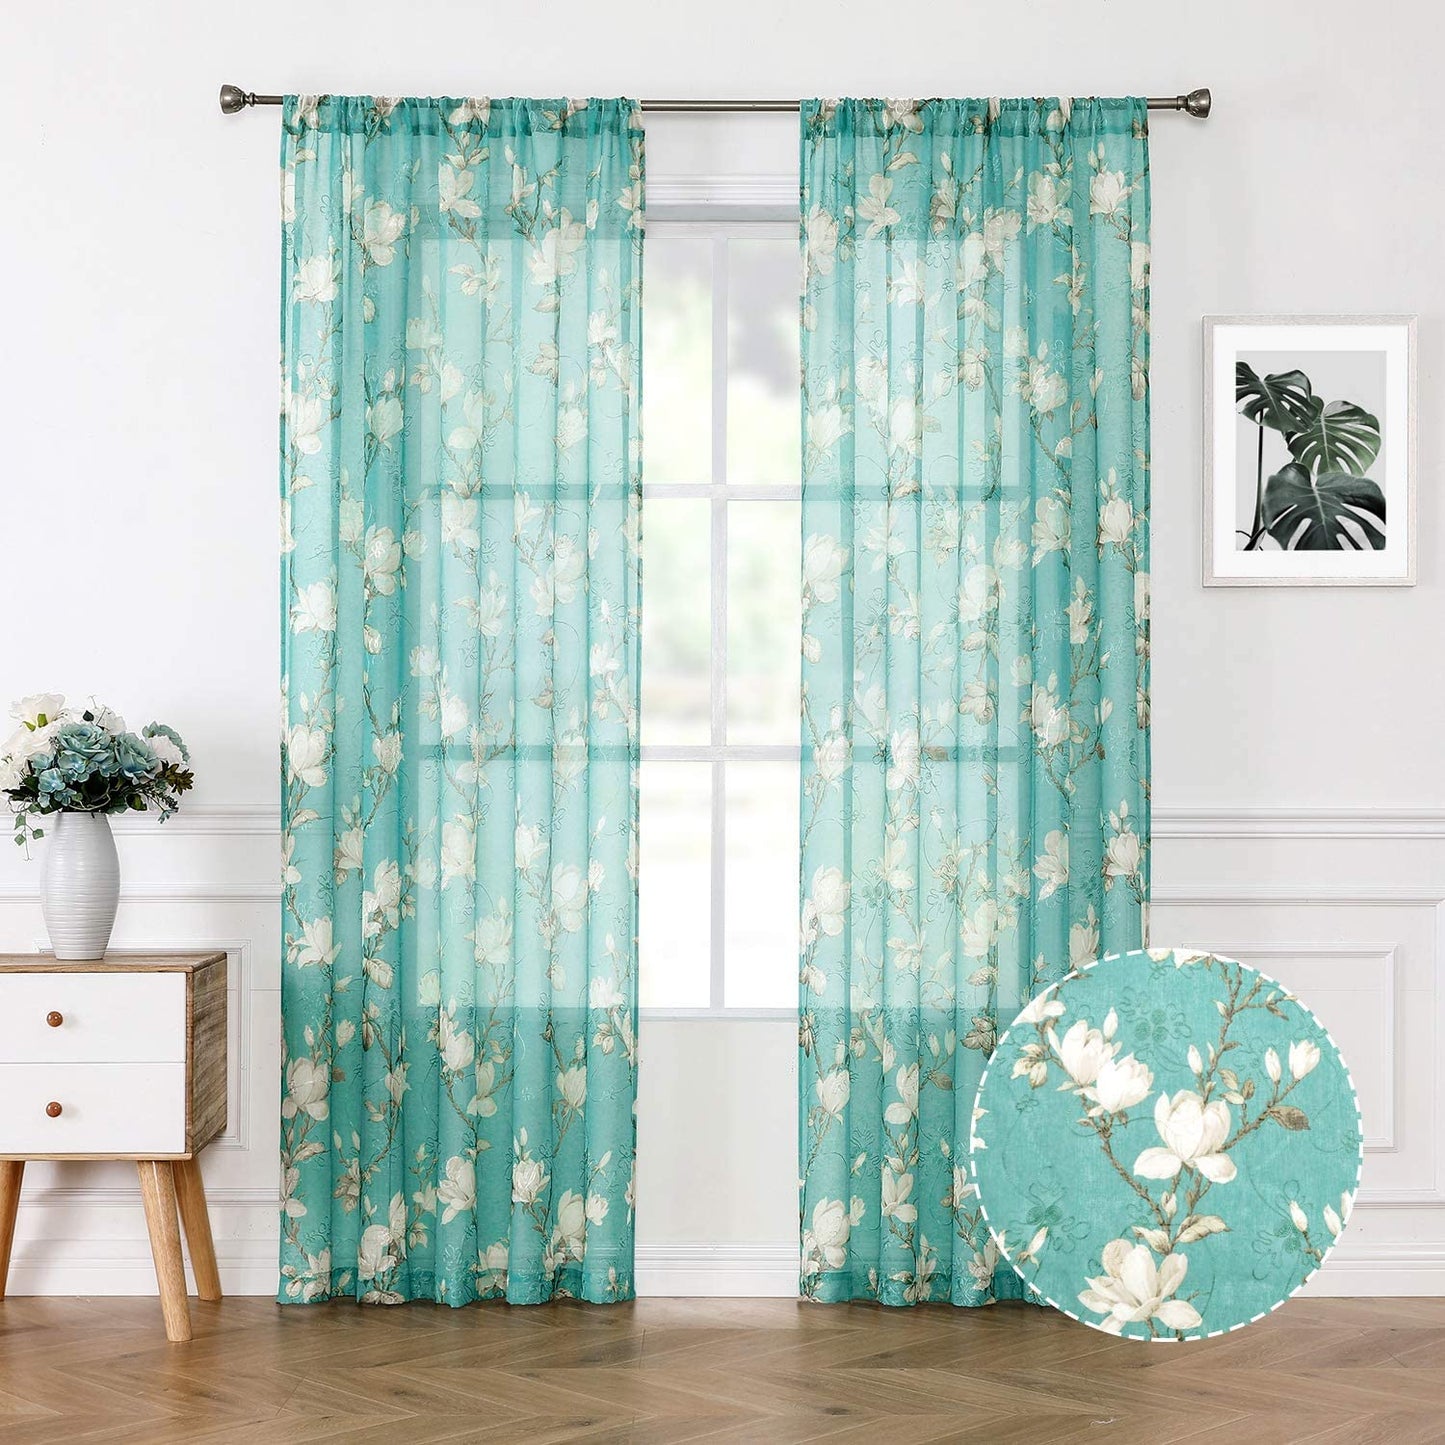 Tollpiz Floral White Sheer Curtain Flower Print Vine Embroidery Bedroom Curtains Rod Pocket Voile Window Curtain for Living Room, 54 X 84 Inches Long, Set of 2 Panels  Tollpiz Tex Turquoise 54"W X 84"L 